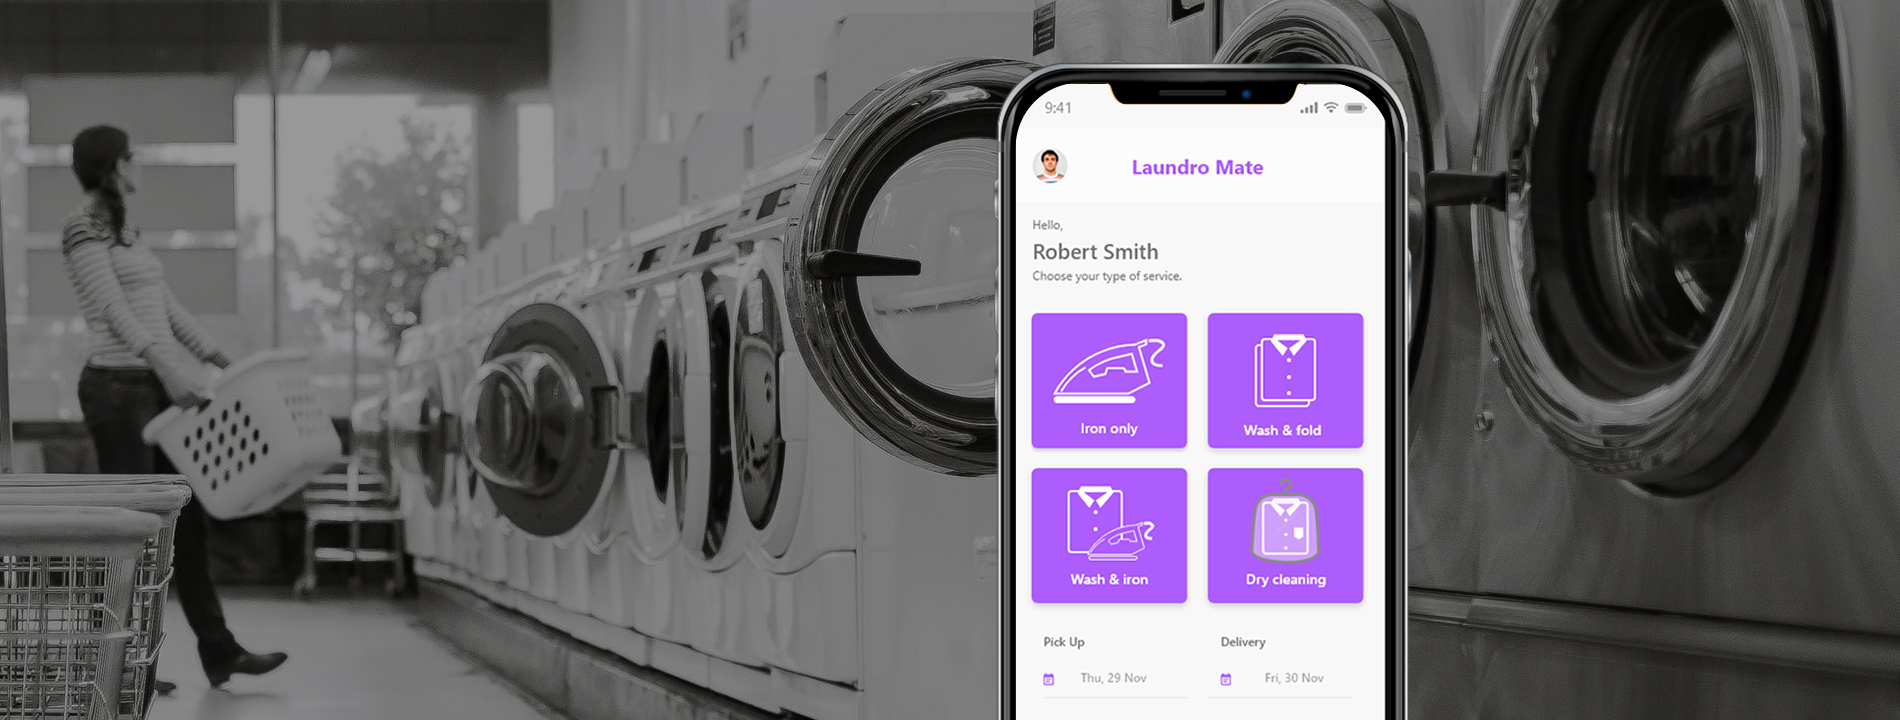 Laundry Mobile App Development Cost and Key Features